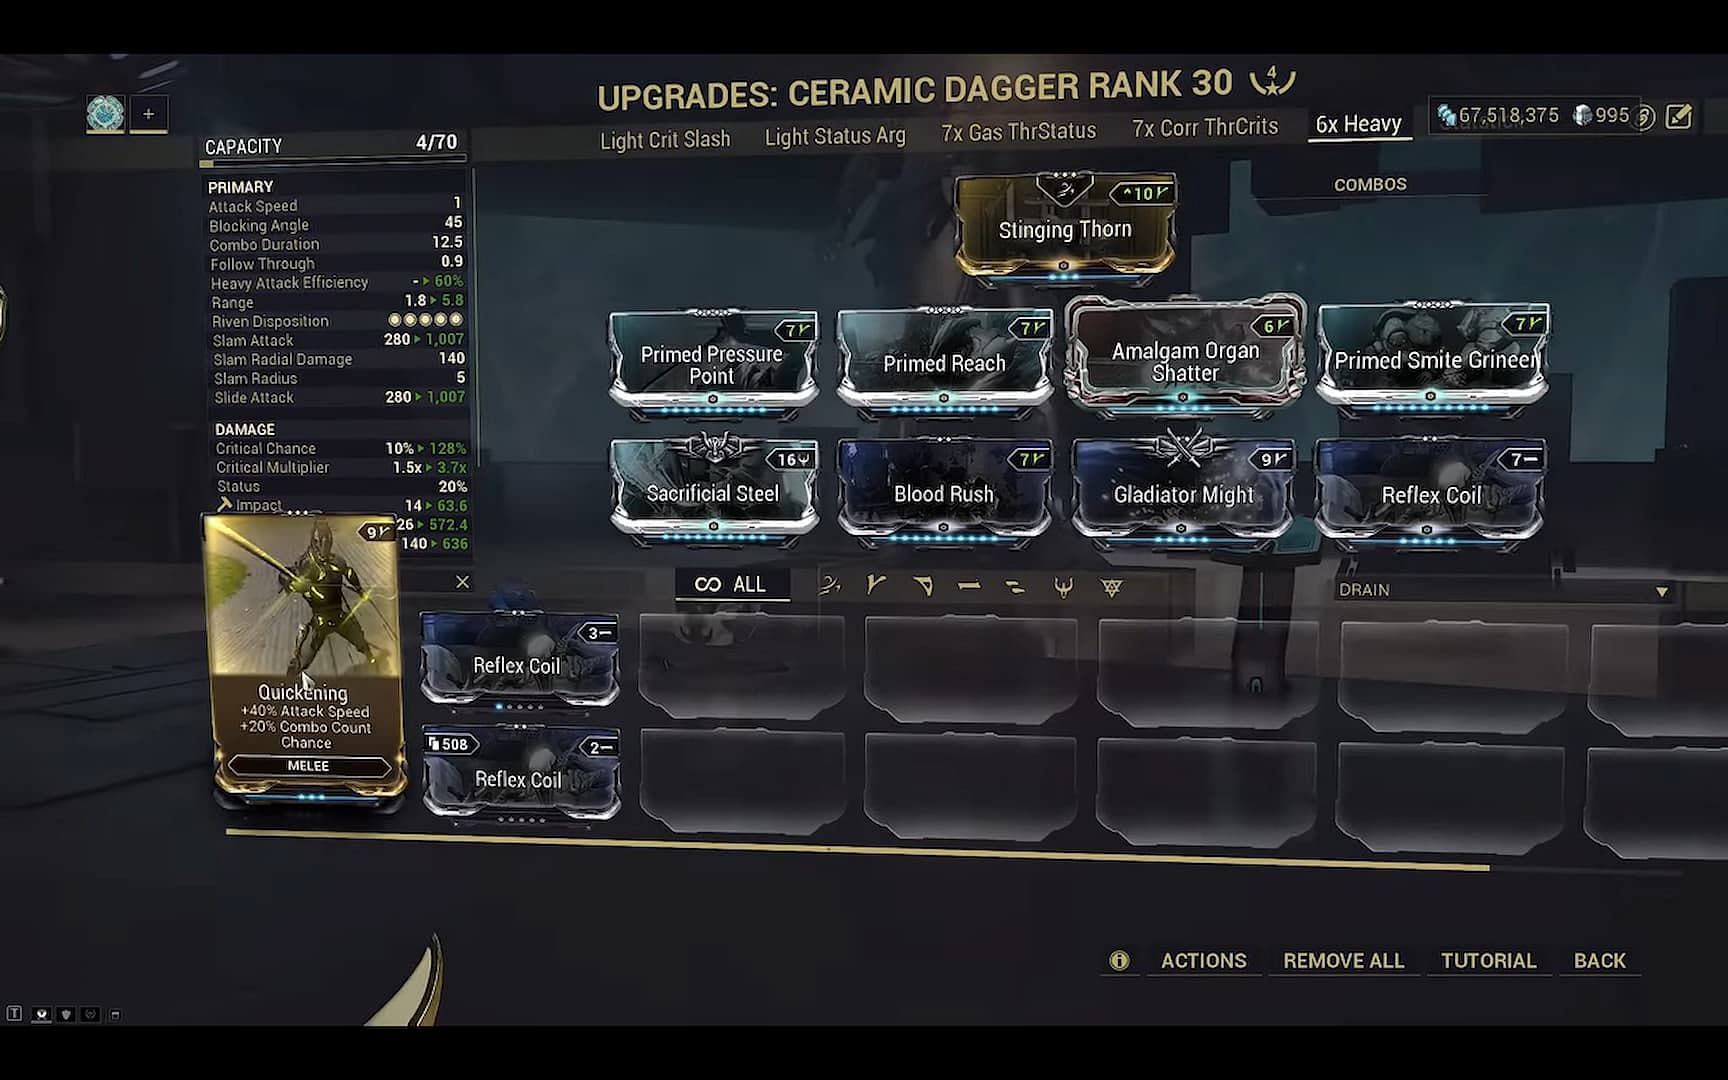 A heavy attack build for Ceramic Dagger will benefit greatly from some form of Heavy Attack Efficiency (Image via Digital Extremes)